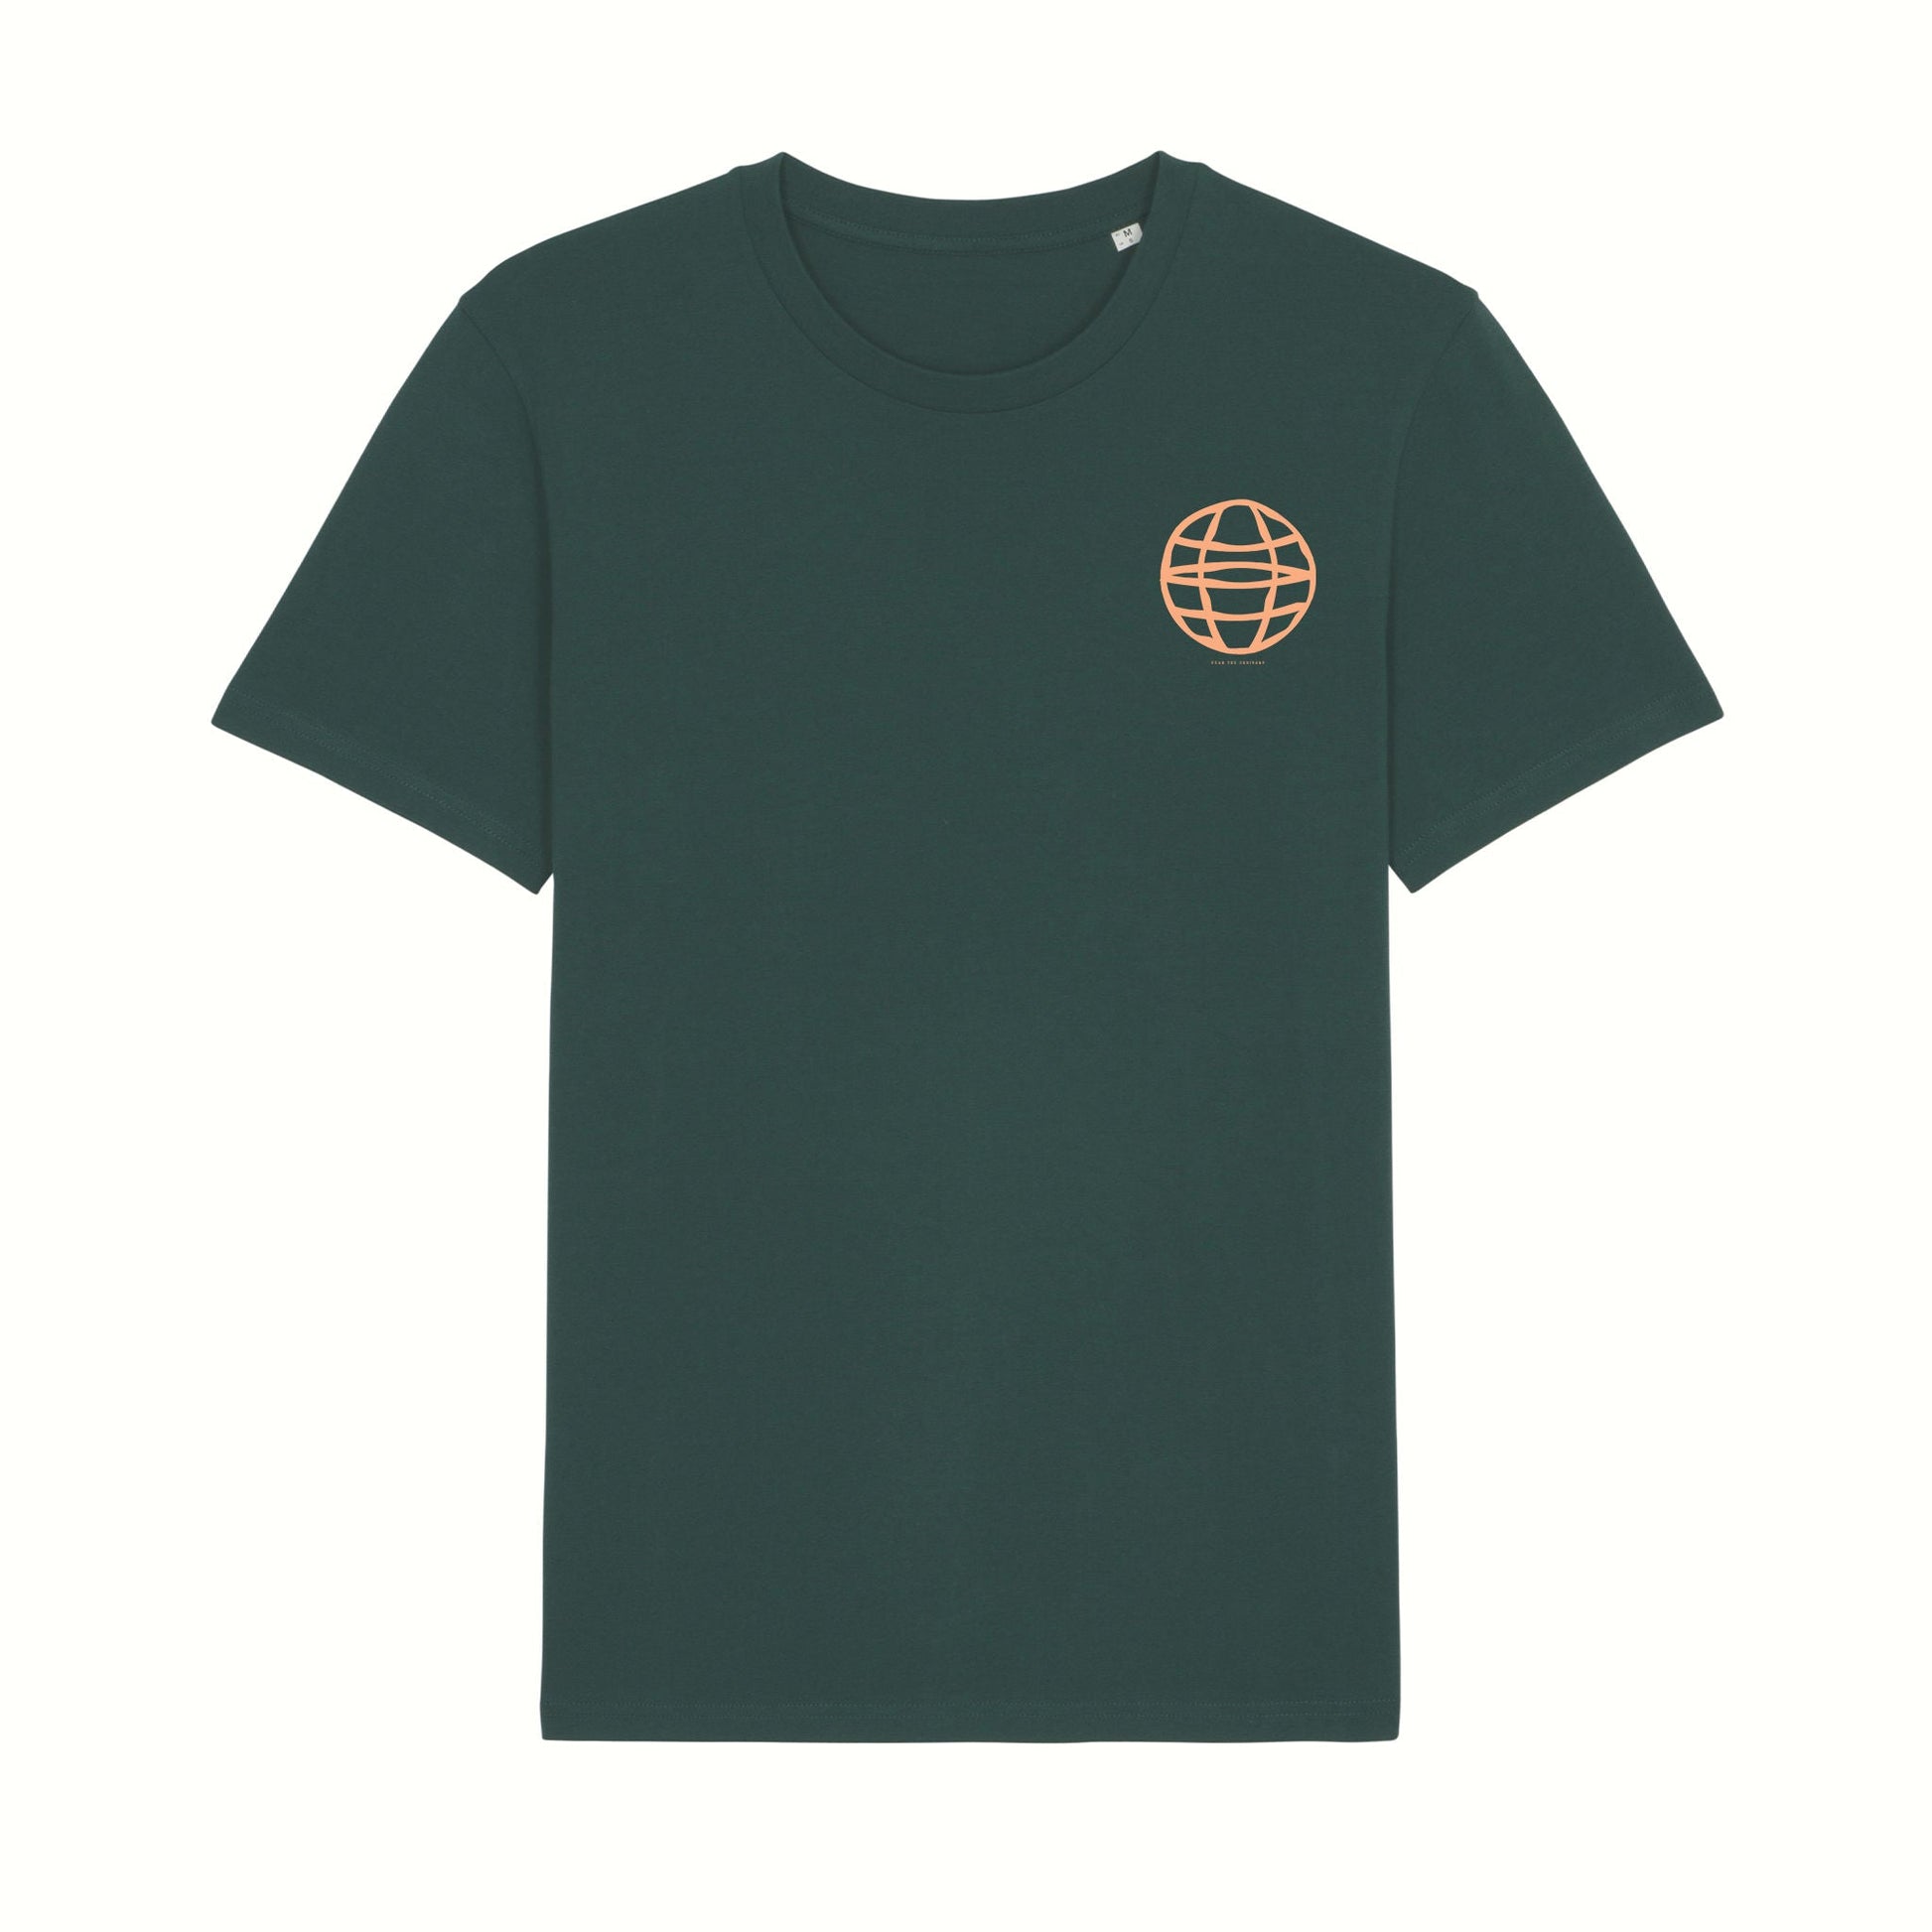 Fear The Ordinary dark green premium organic cotton t-shirt with a Sunset Chaser front print.